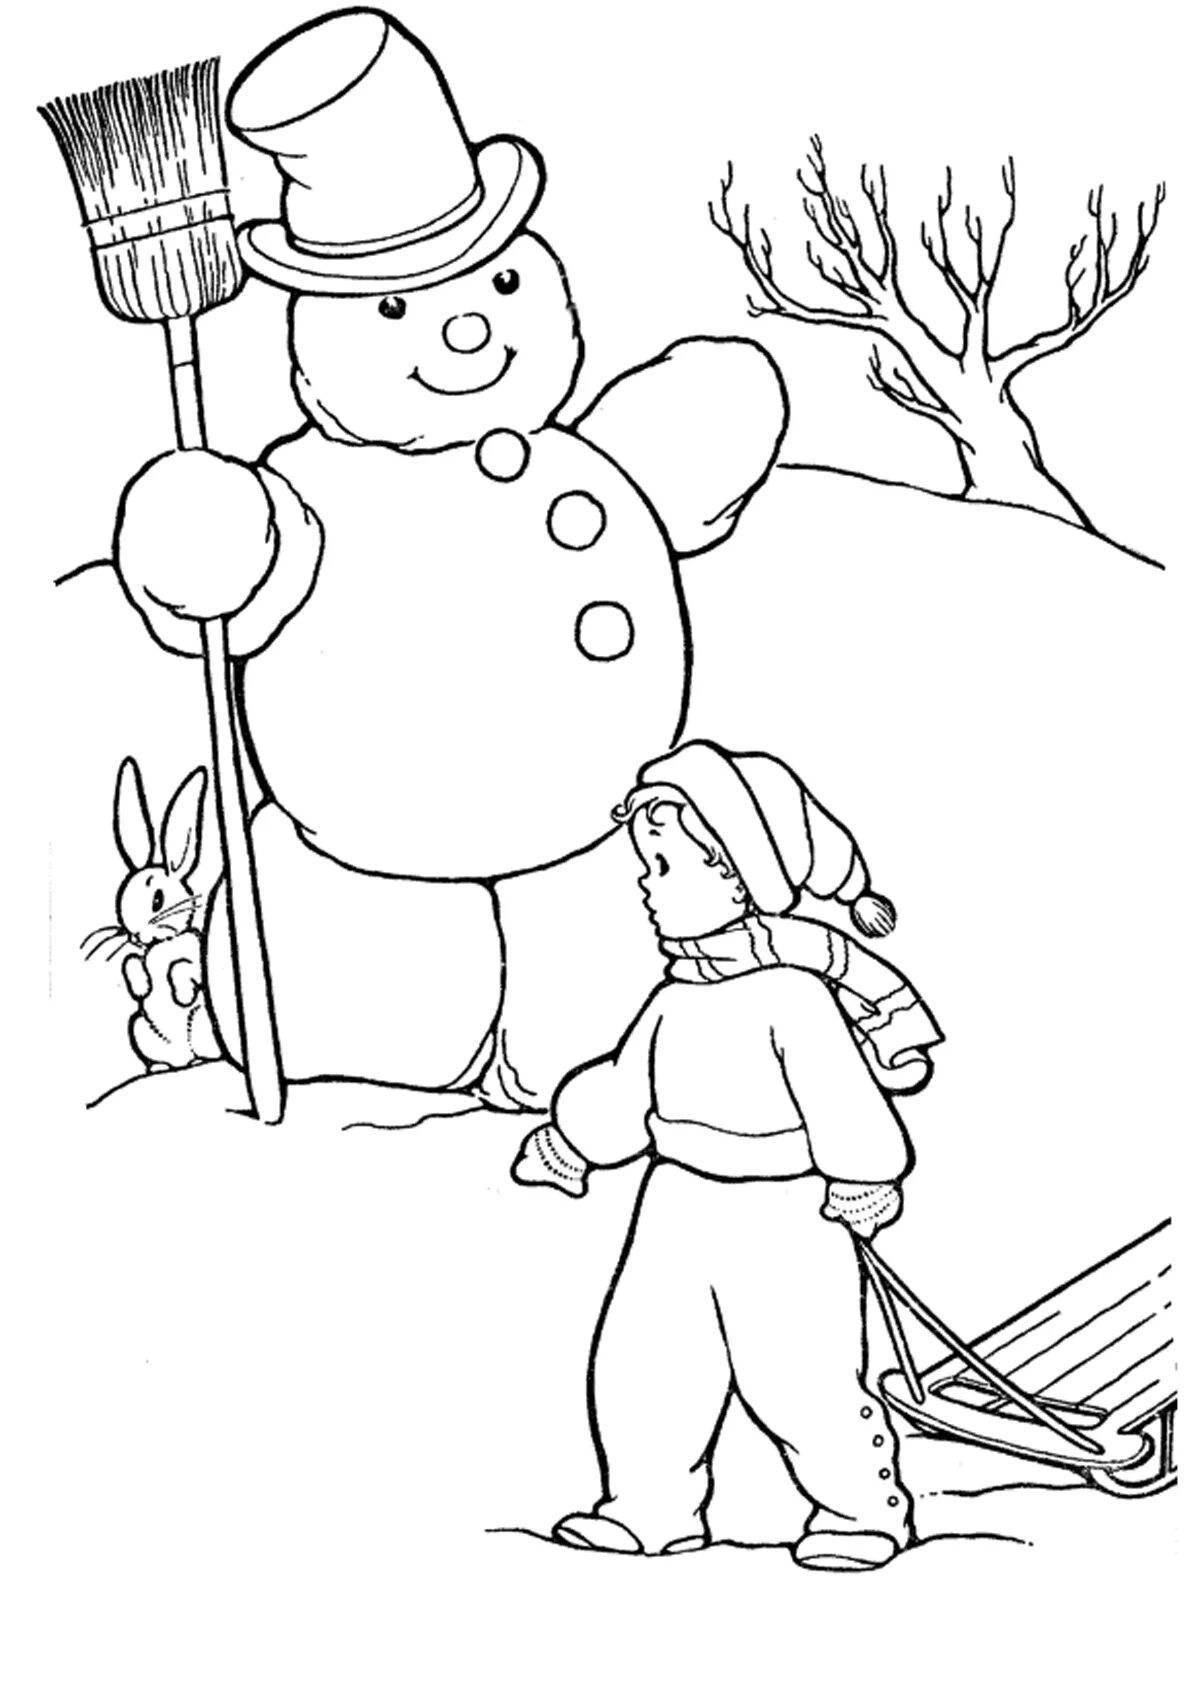 Fairytale coloring book winter holidays for kids